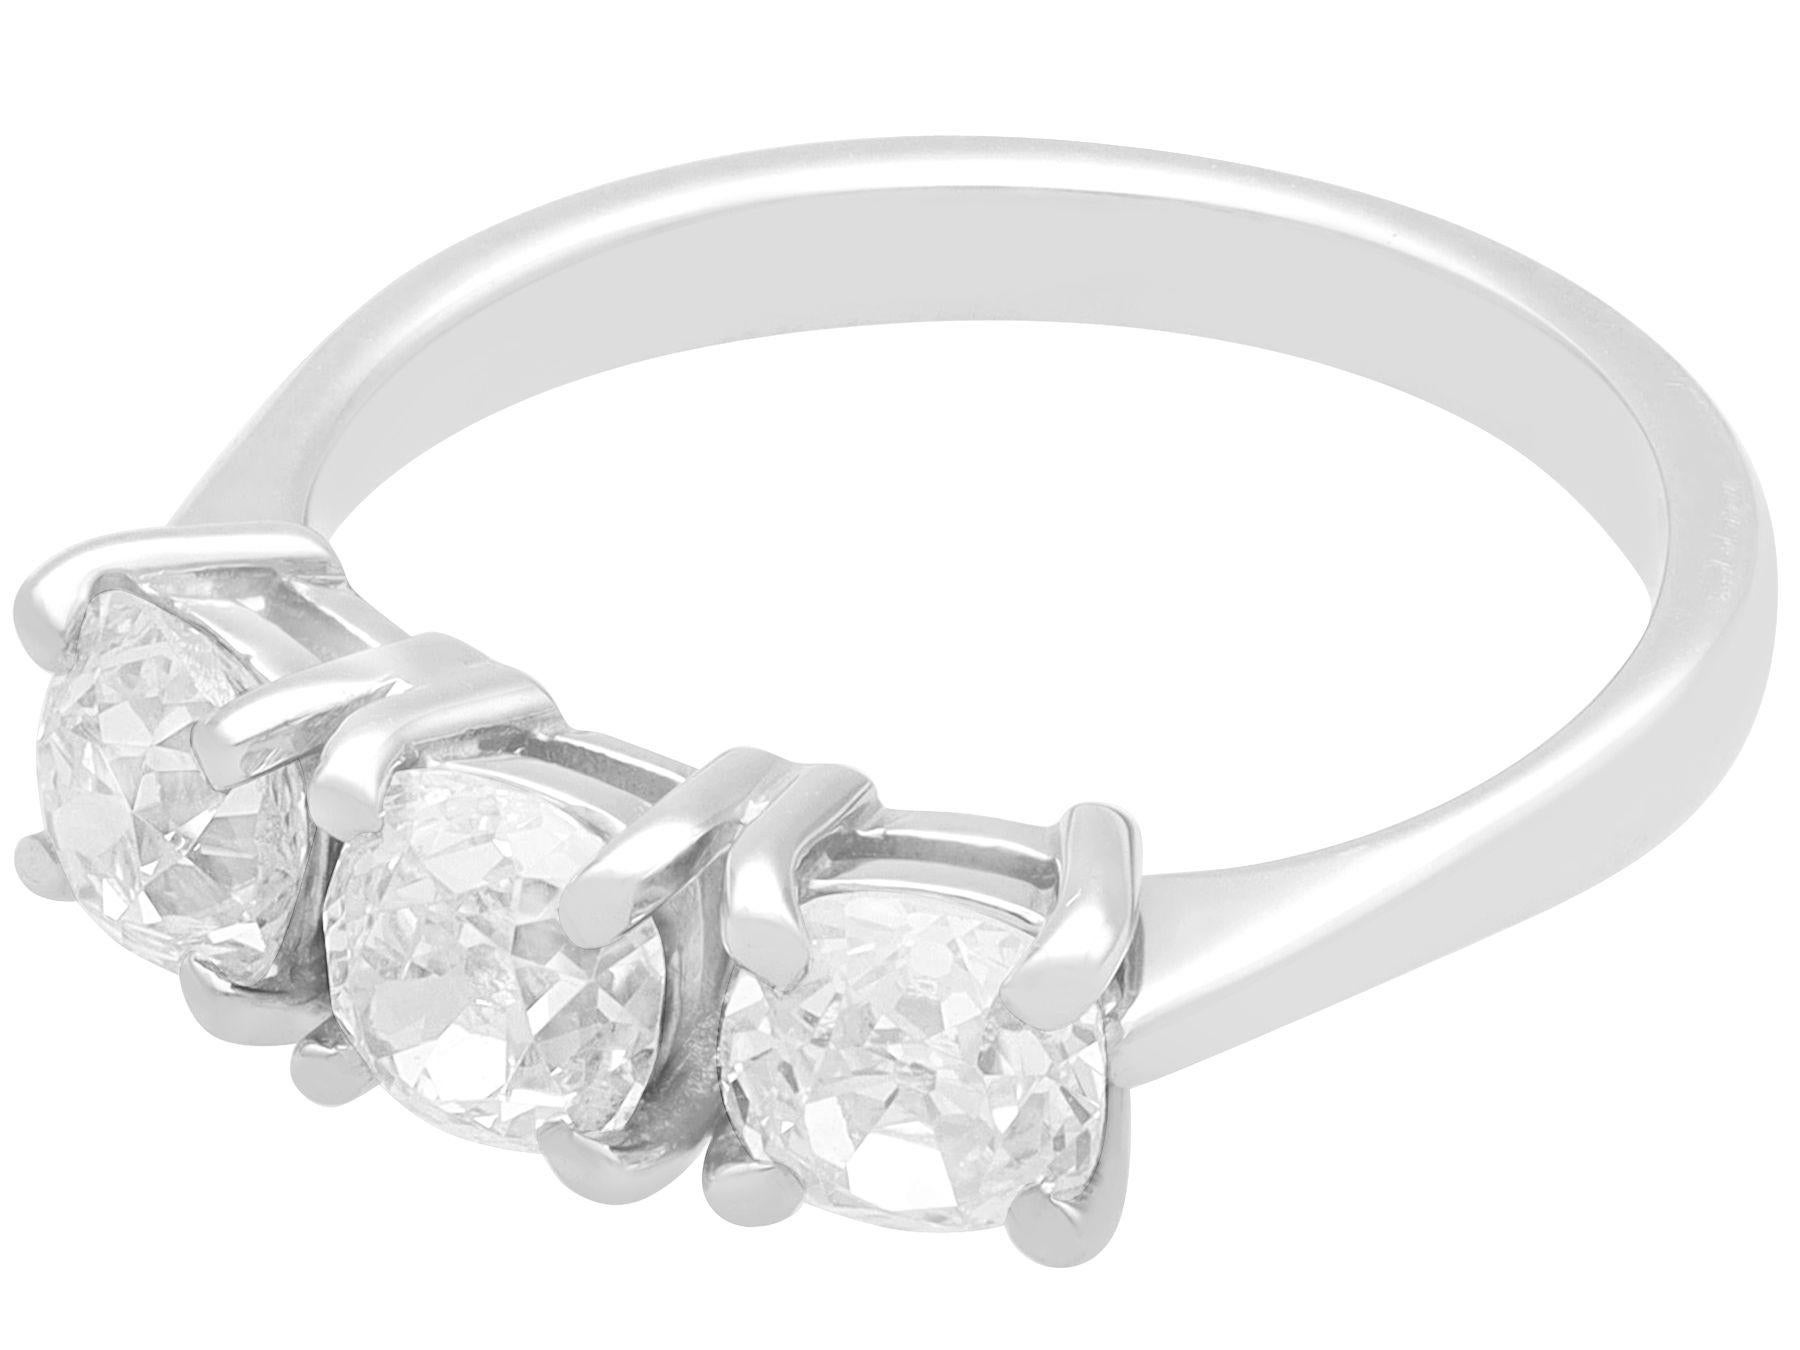 Round Cut Antique and Contemporary 1.73 Carat Diamond and 18k White Gold Trilogy Ring For Sale